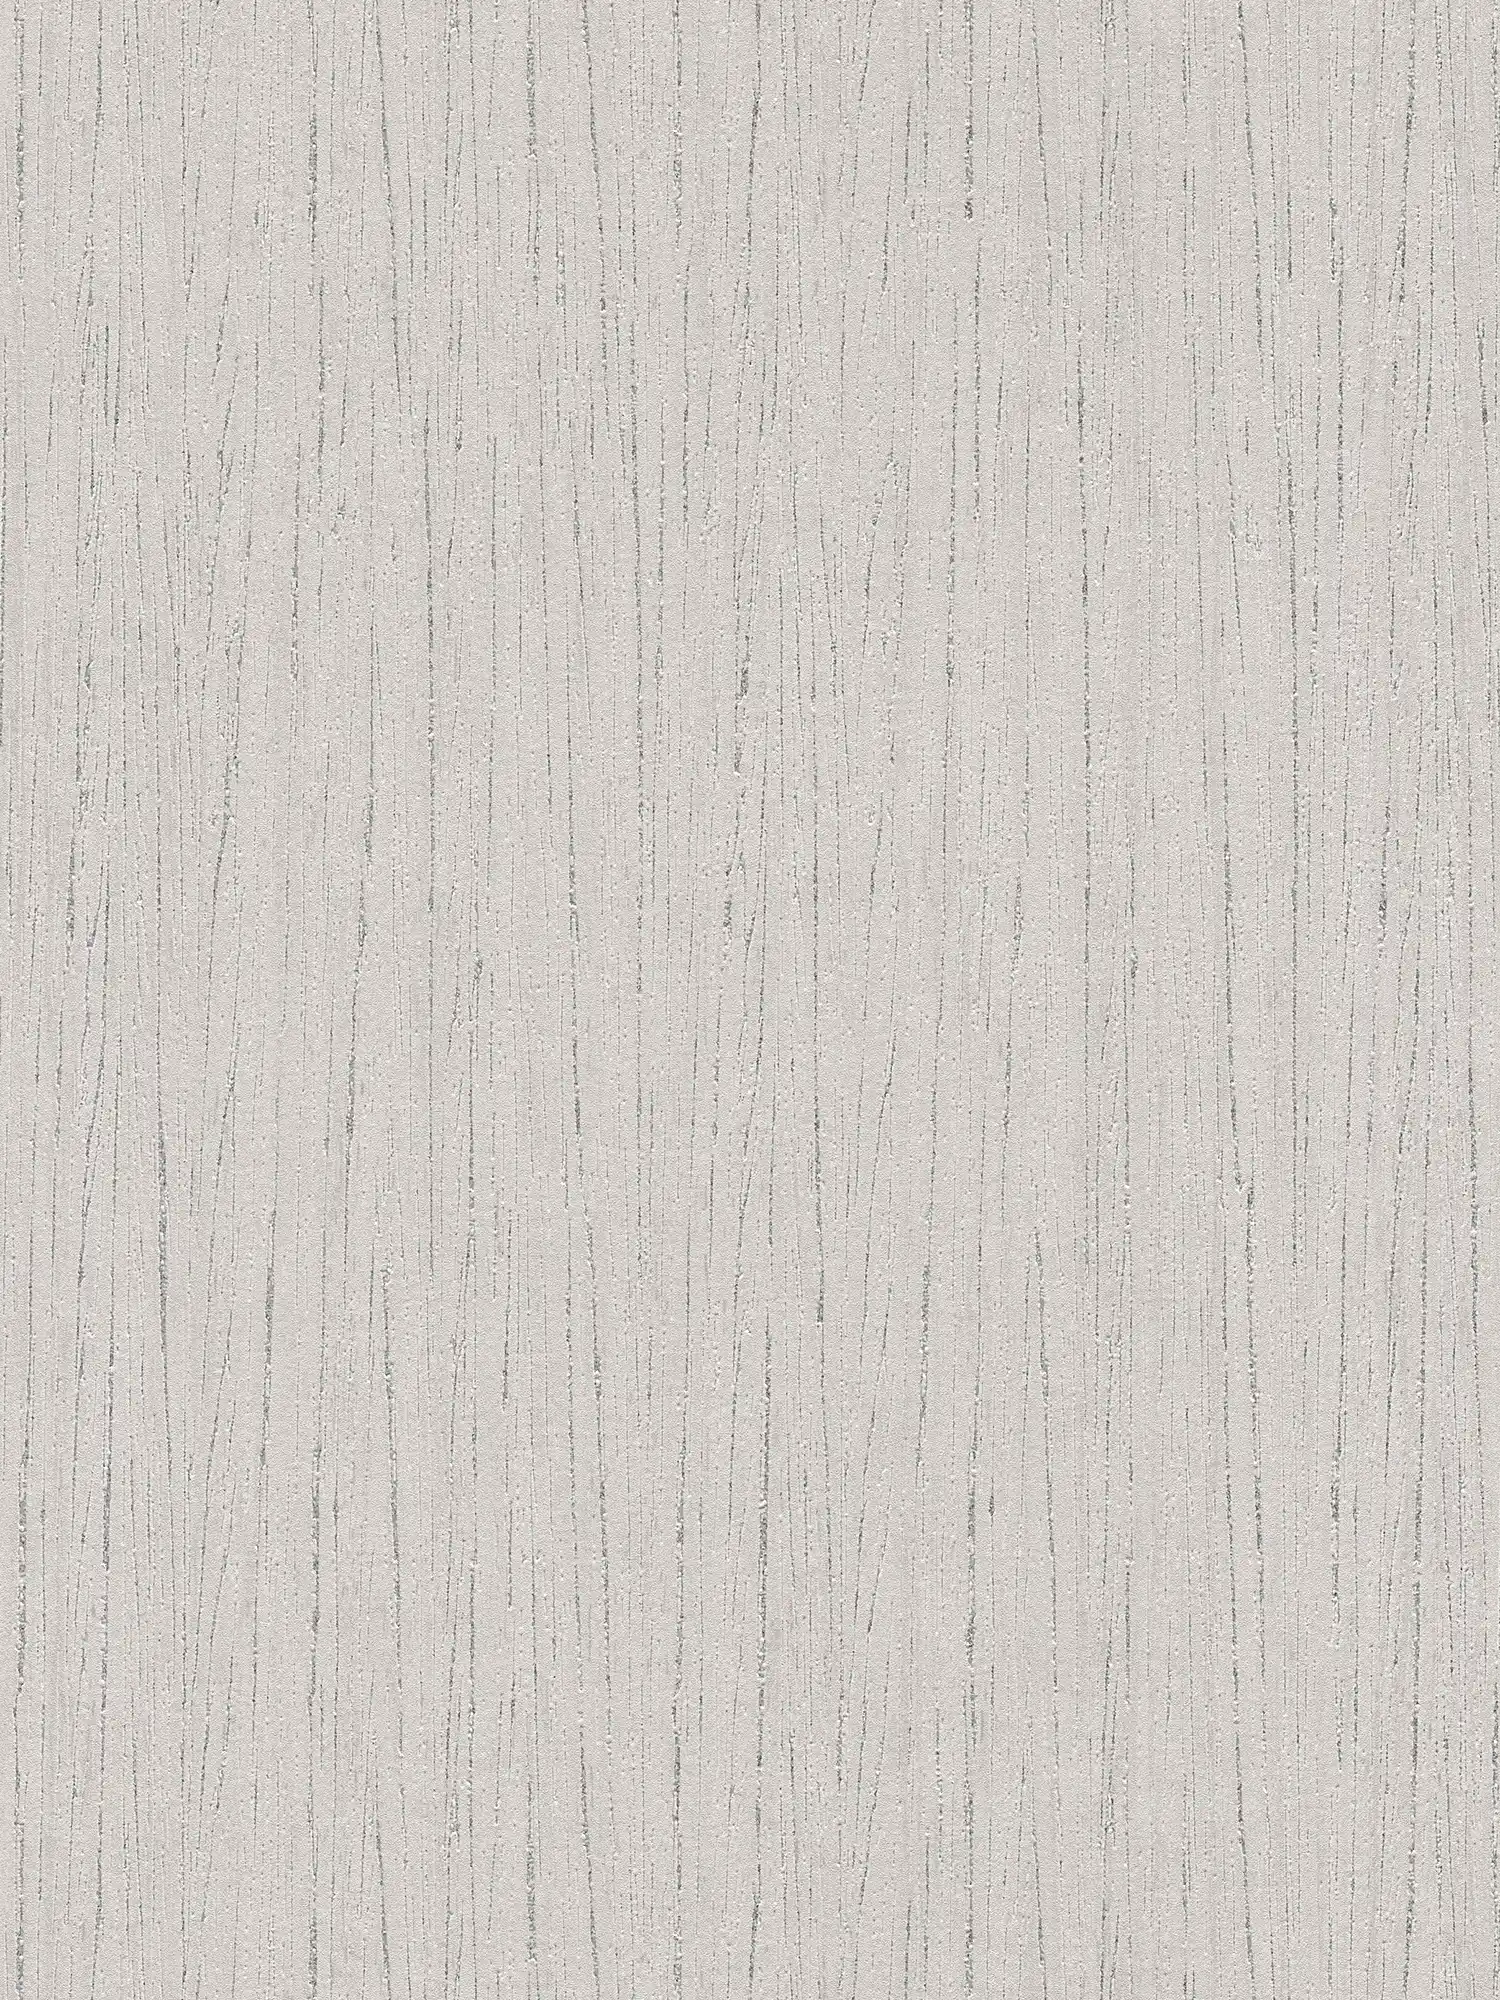 Grey wallpaper non-woven with lined pattern in nature style
